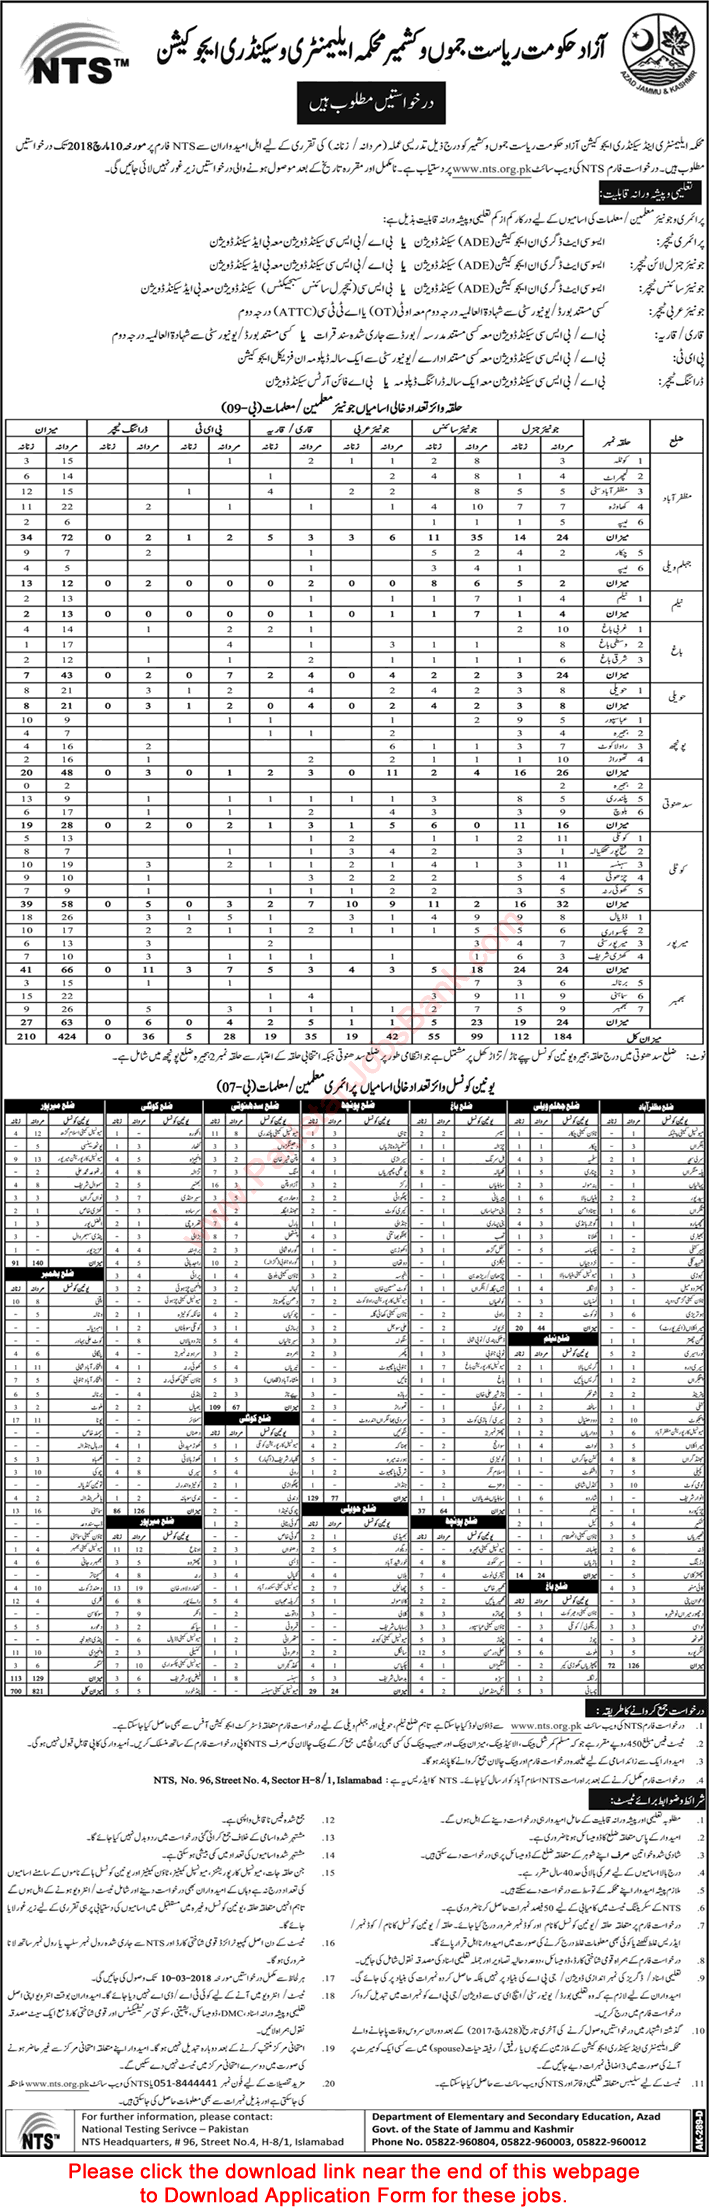 Elementary and Secondary Education Department AJK Jobs 2018 February NTS Application Form Teachers Latest